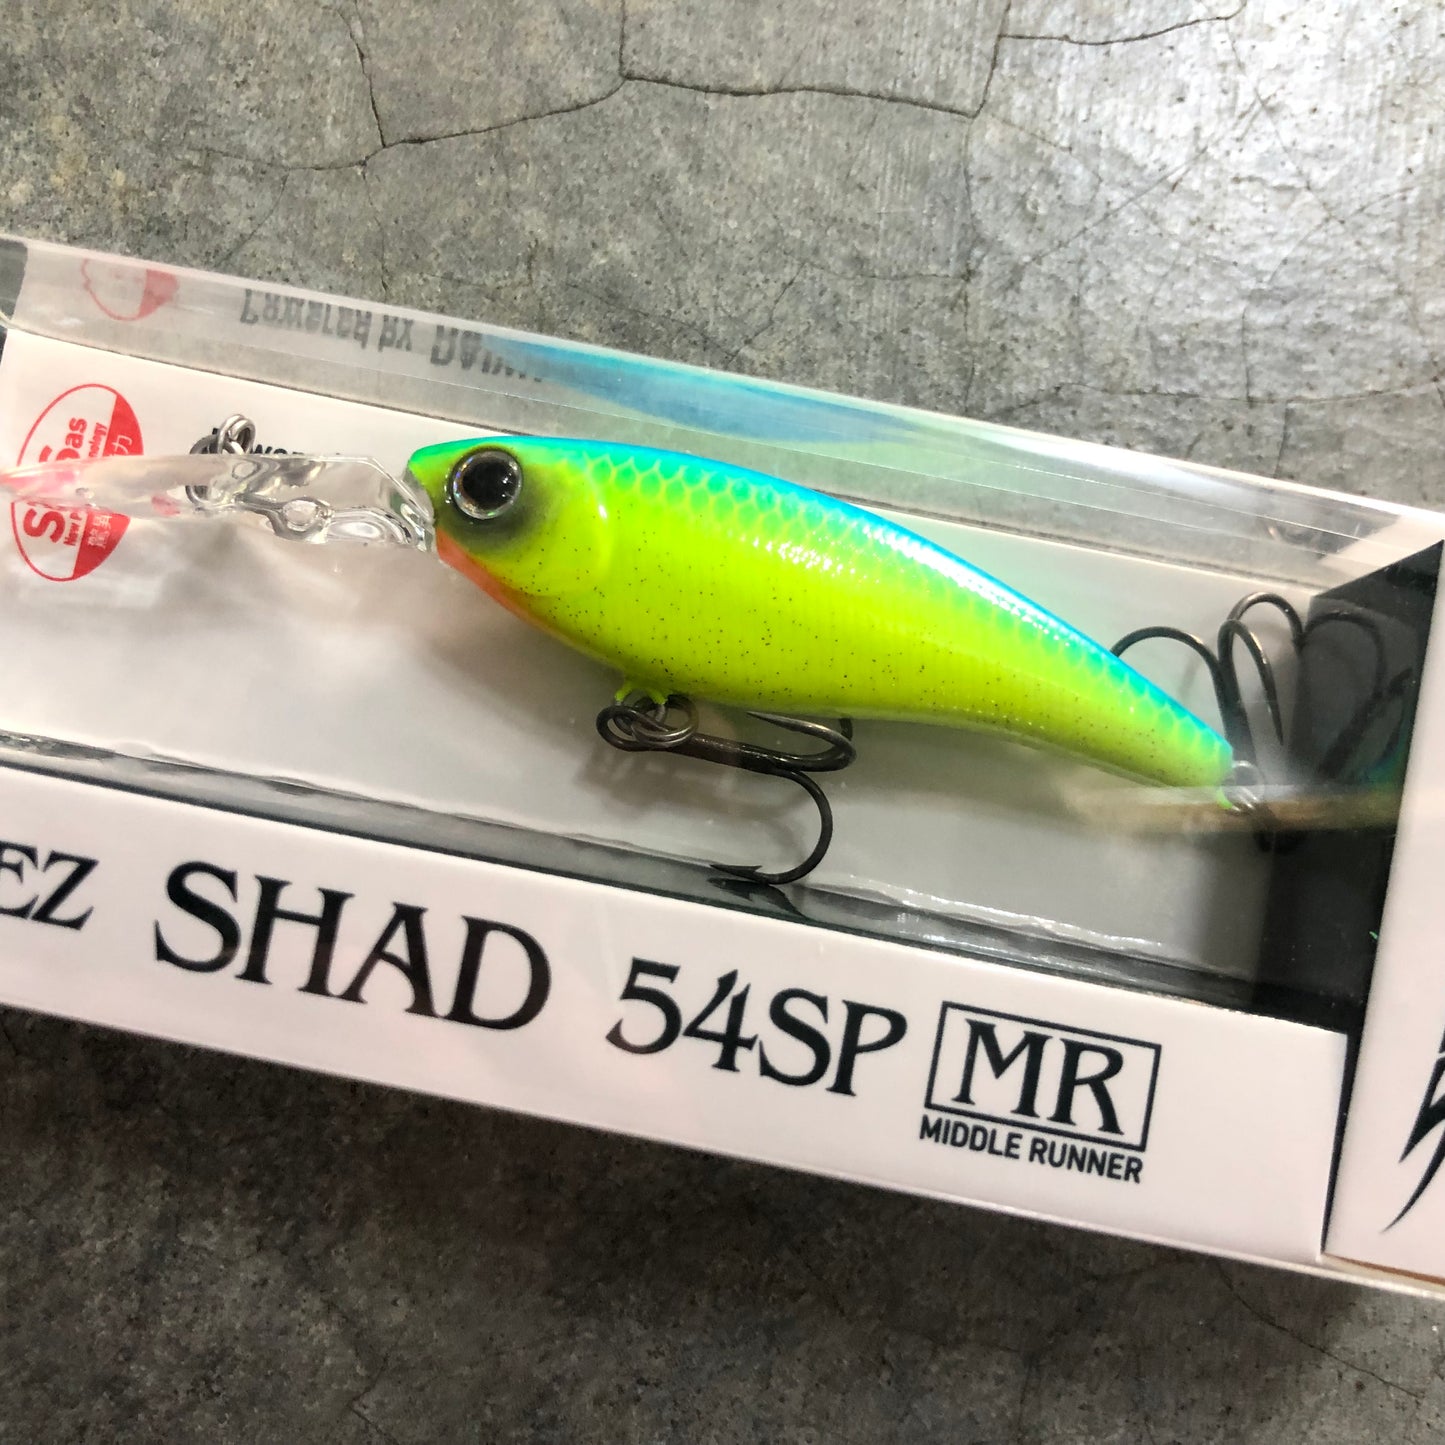 Steez Shad 54SP MR